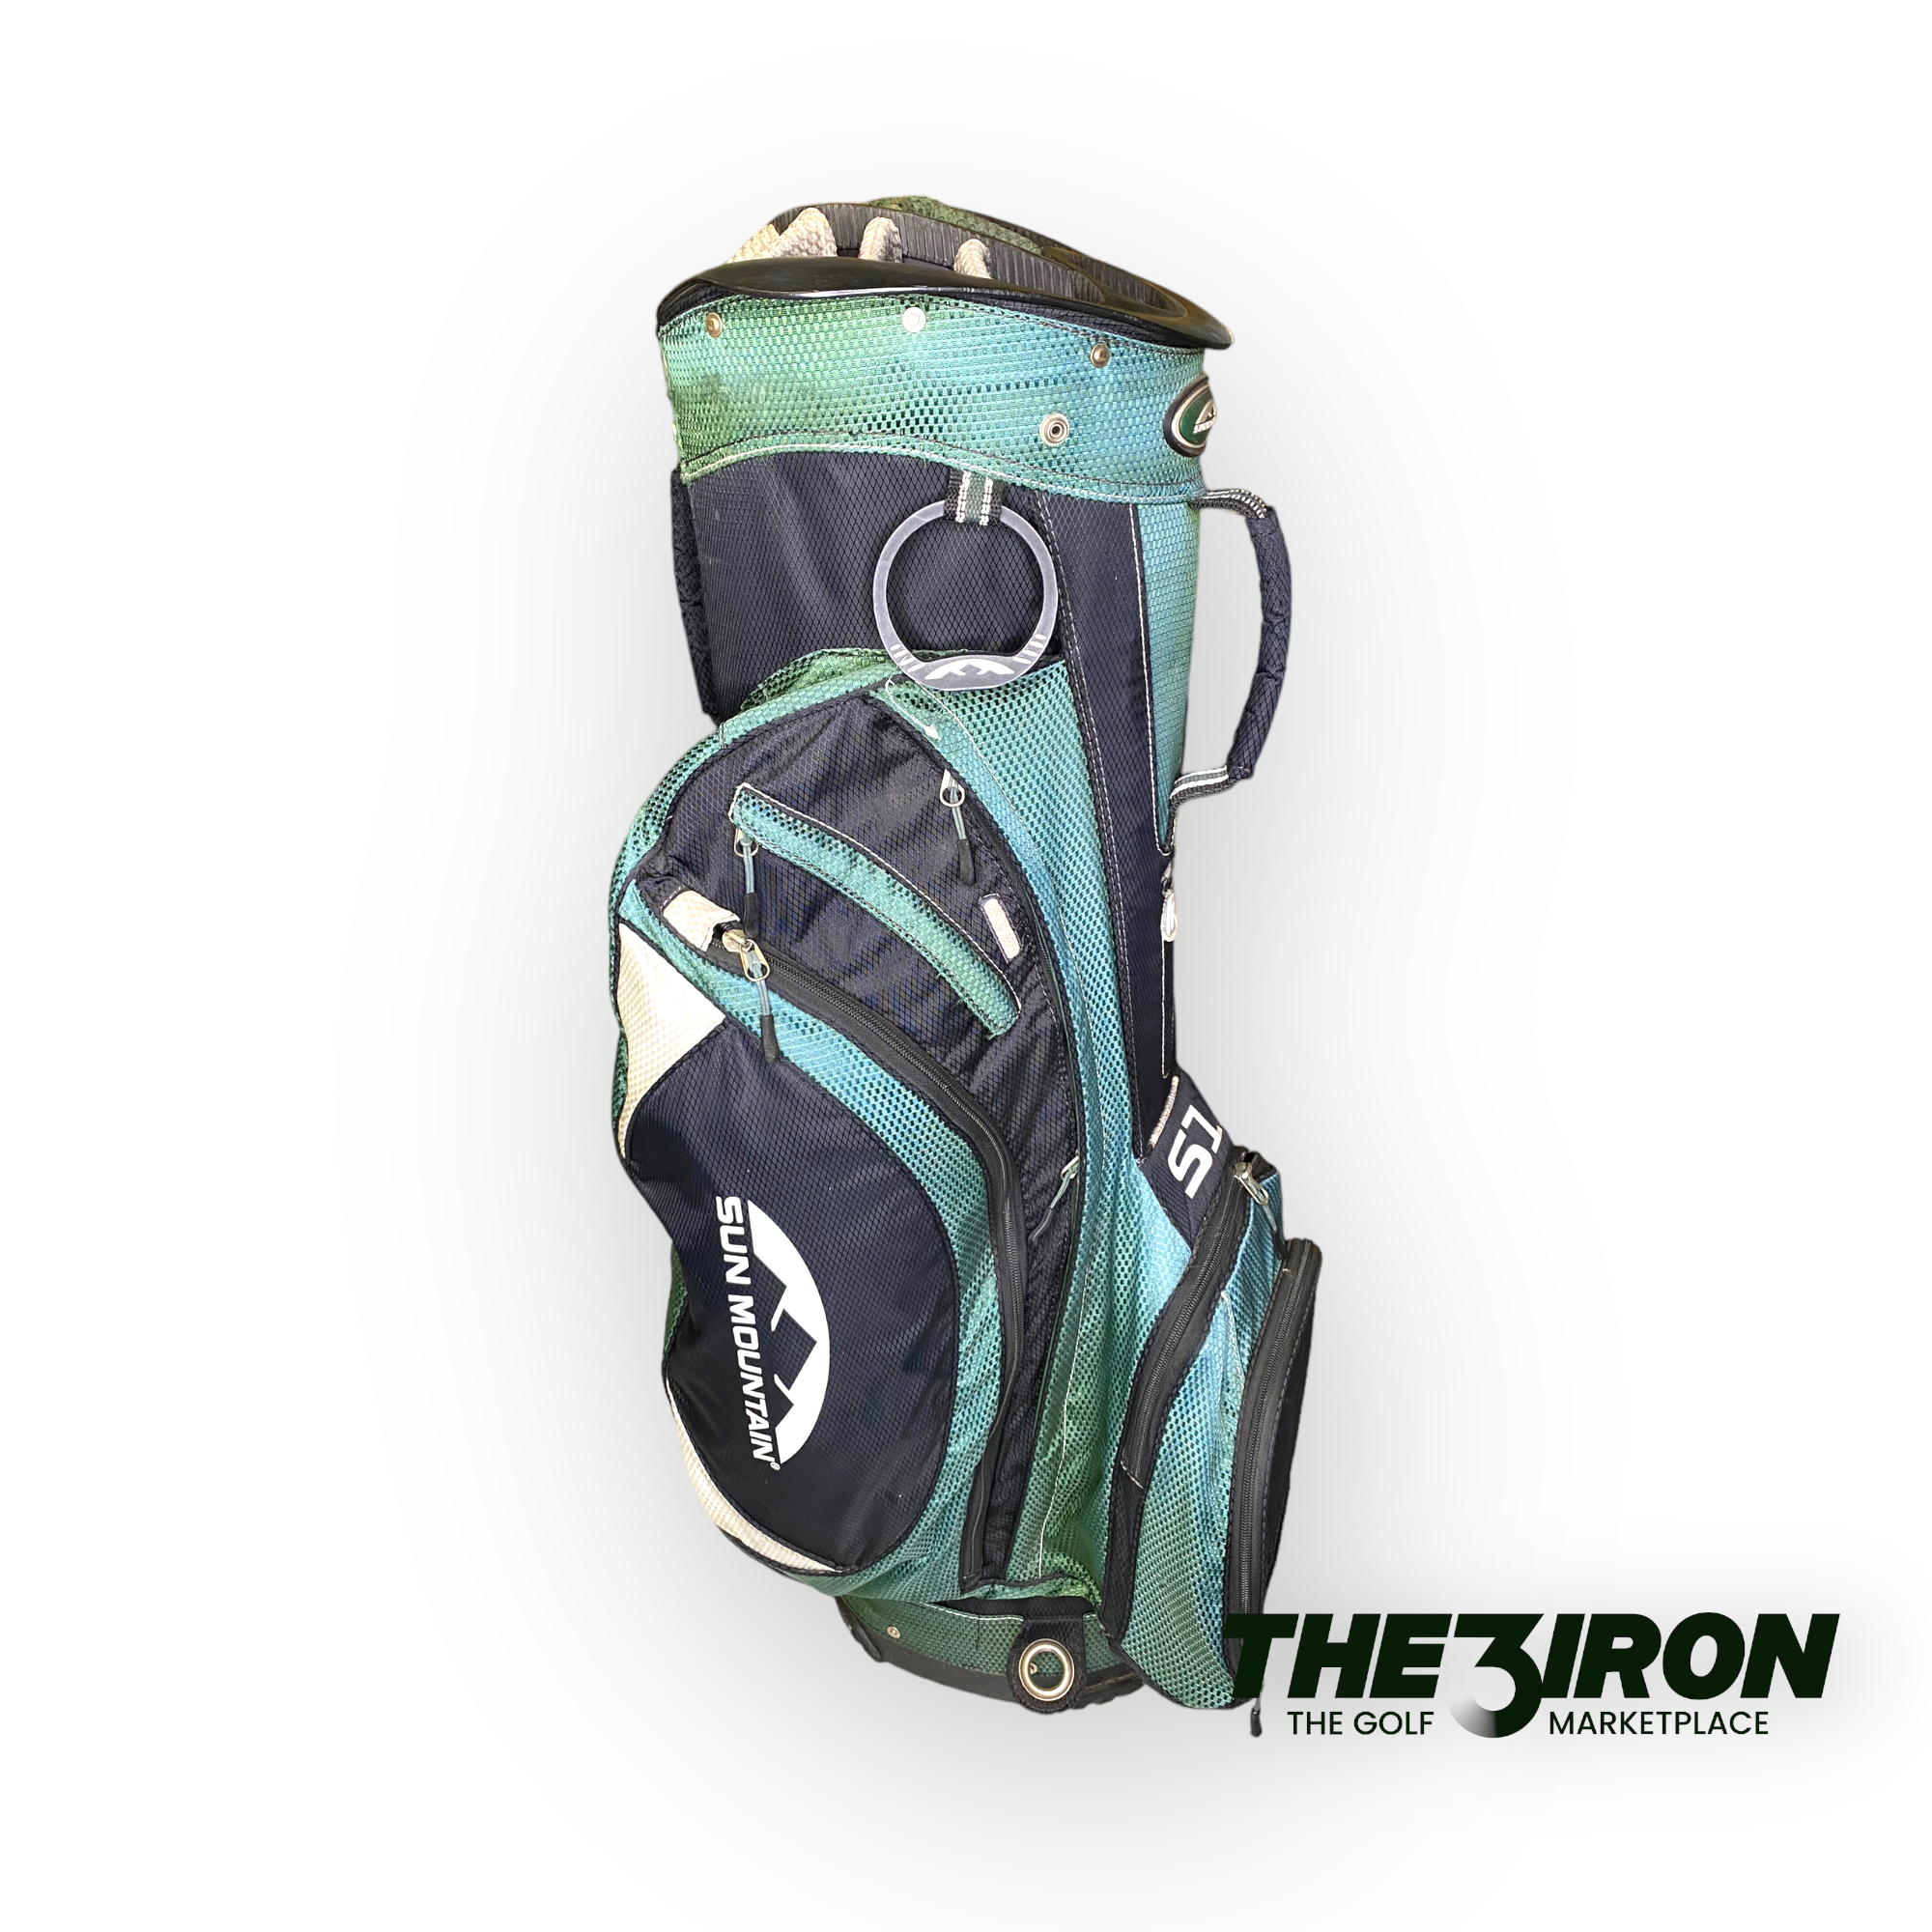 Sun Mountain Golf Bags, Carts and Apparel  Proudly Assembled in MT –  SunMountainSports